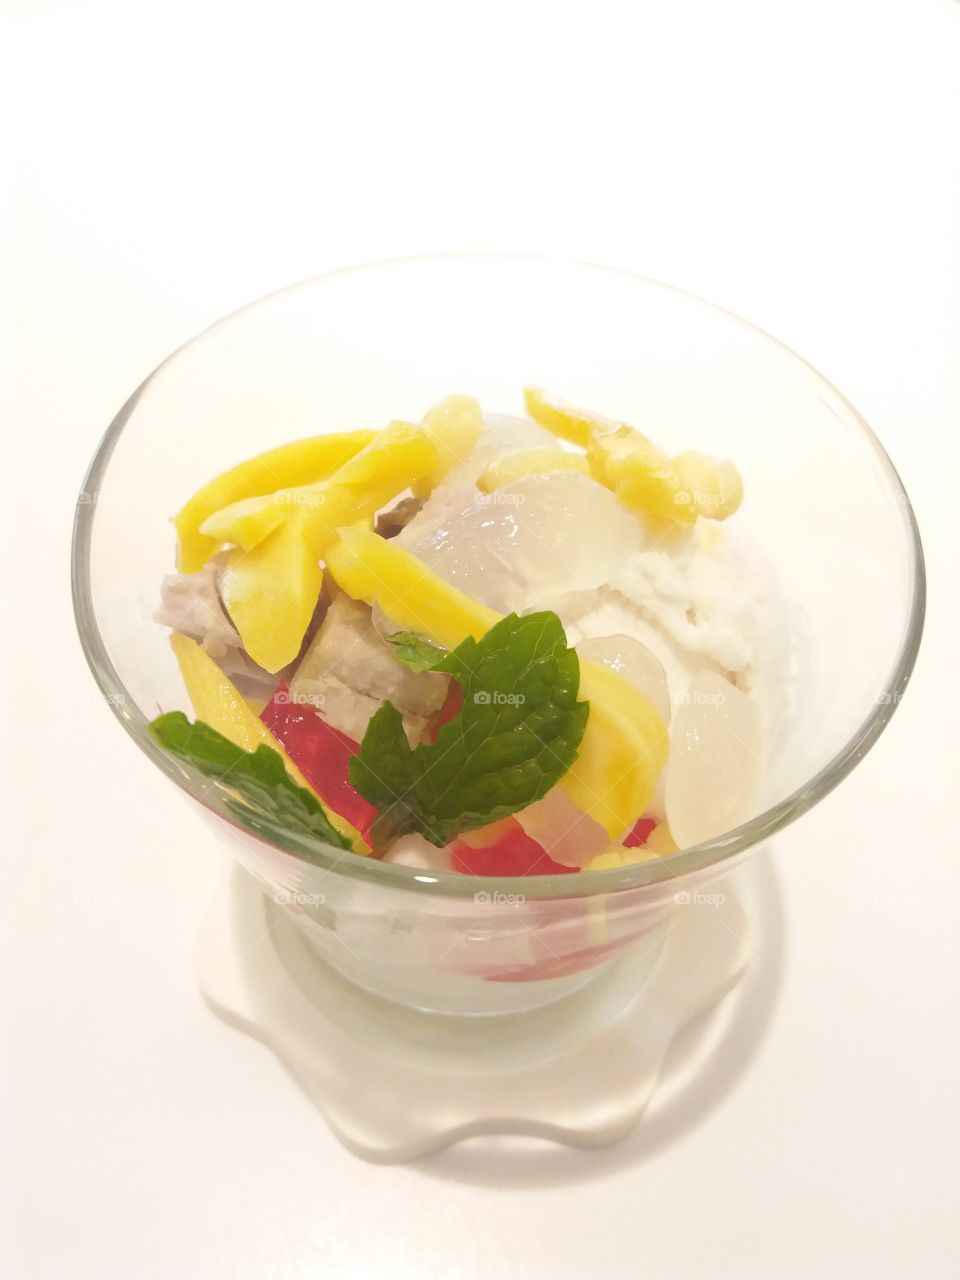 coconut ice cream with toppings